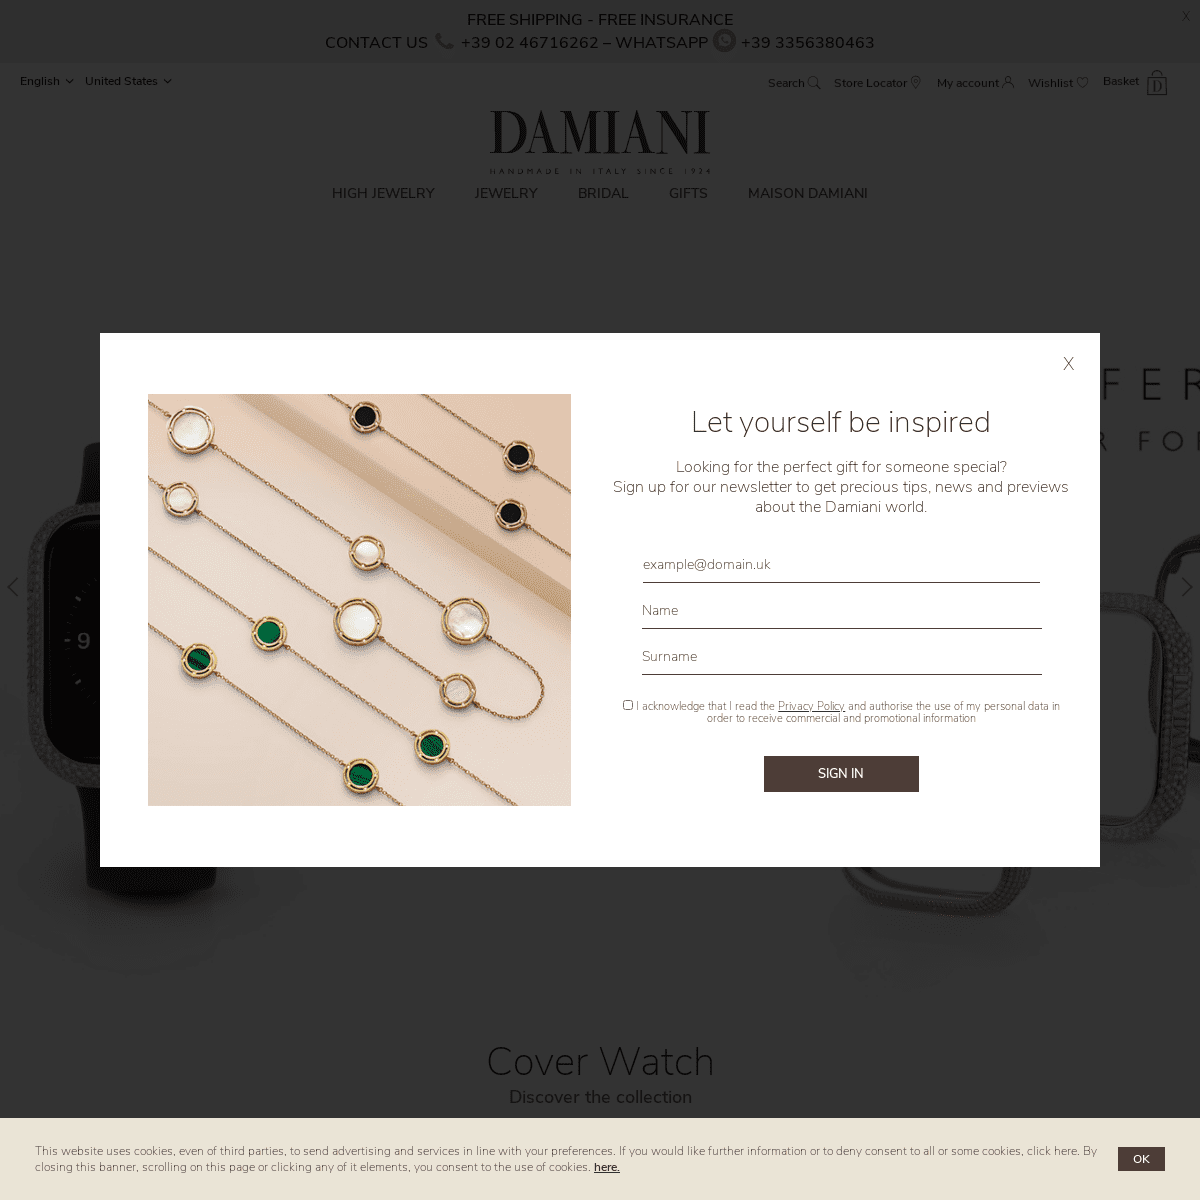 A complete backup of https://damiani.com